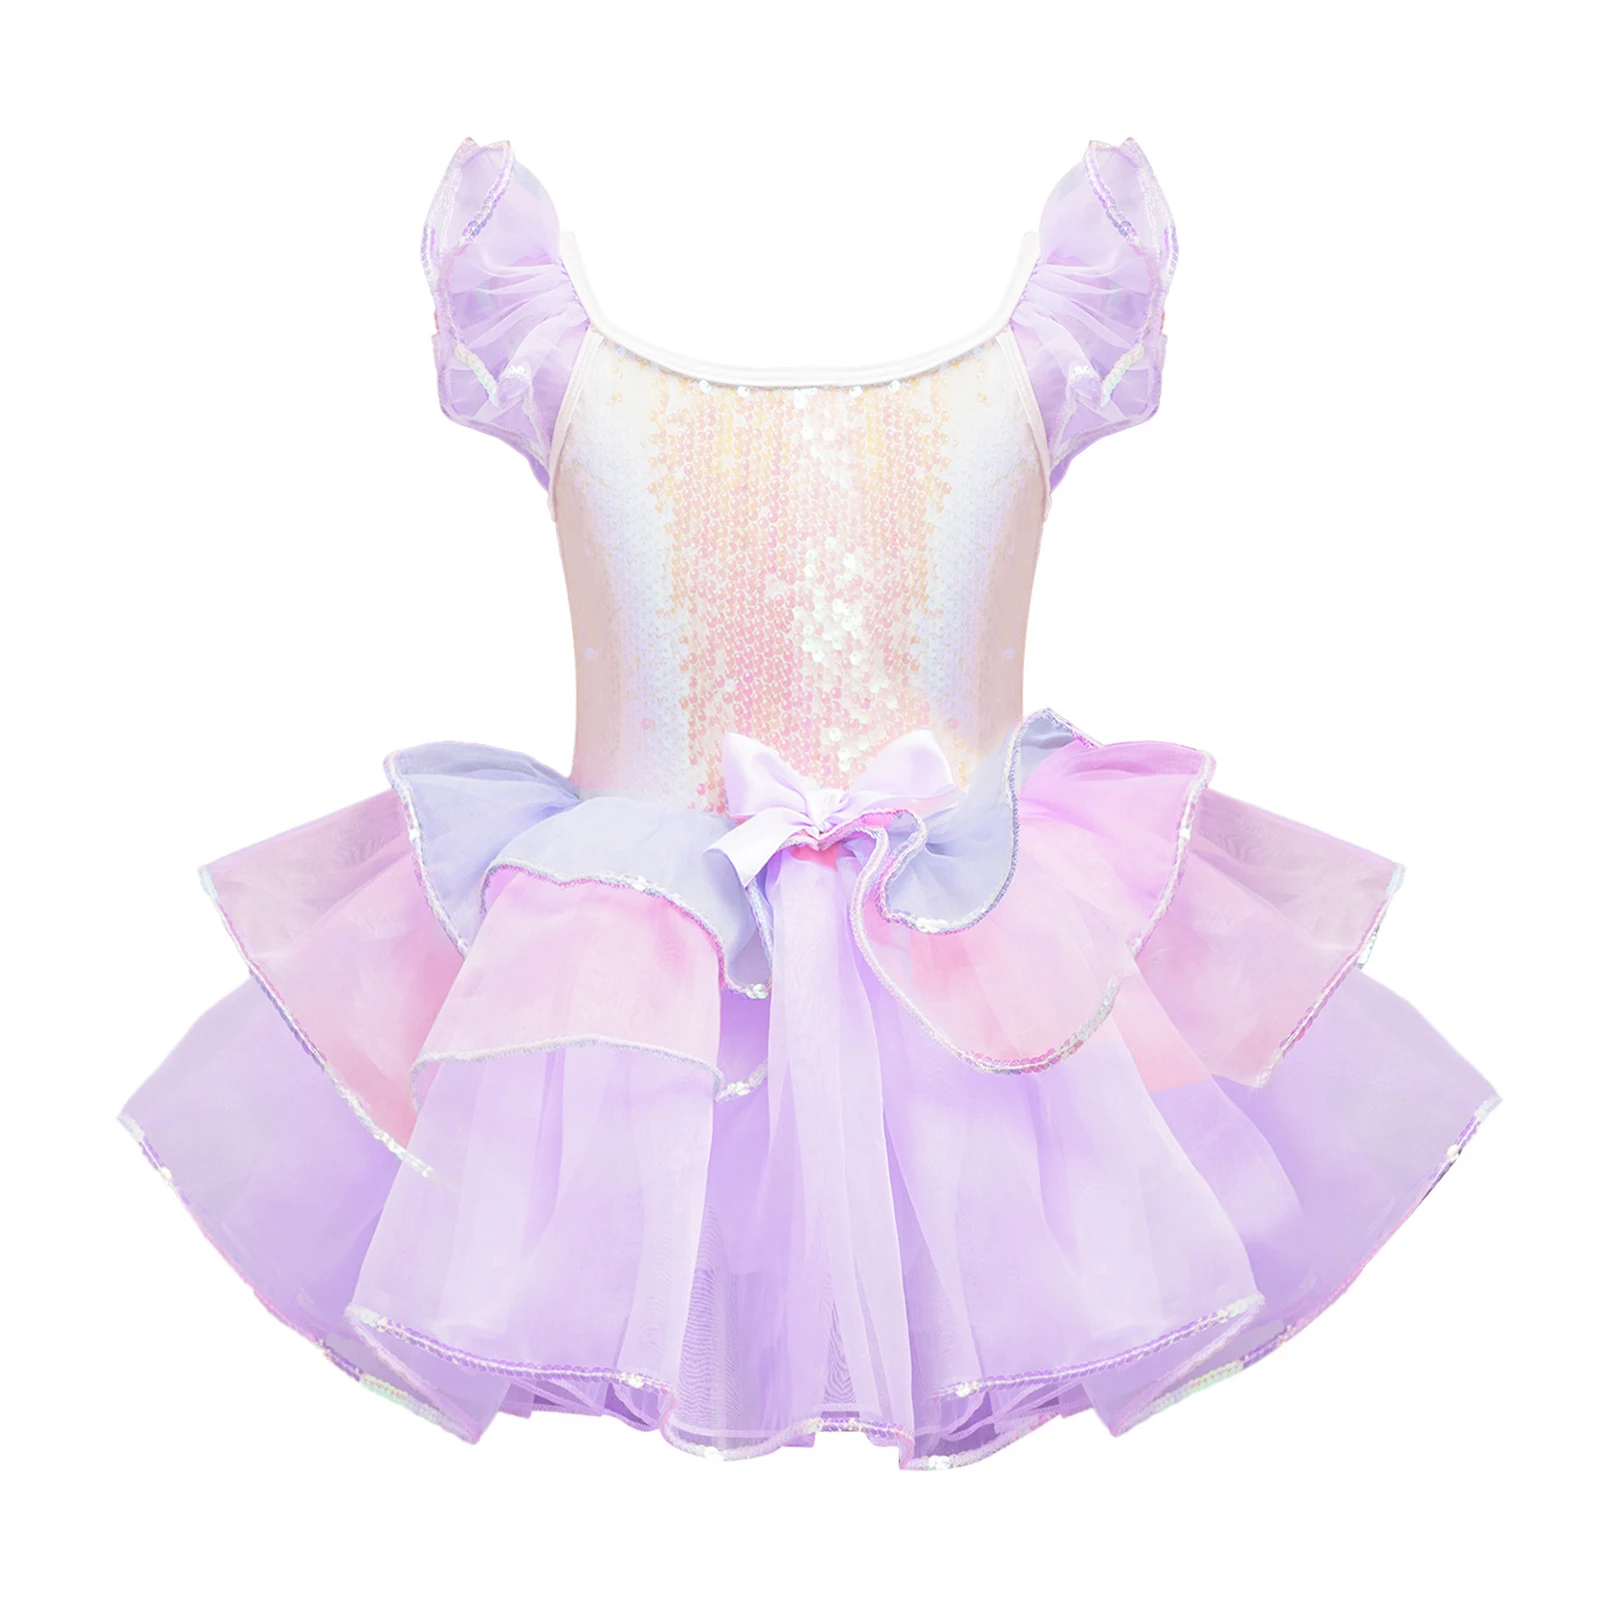 

Kids Girls Sparkly Sequins Tiered Dresses Ruffled Sleeve Bowknot Tutu Dress Birthday Wedding Party Dance Performance Costume